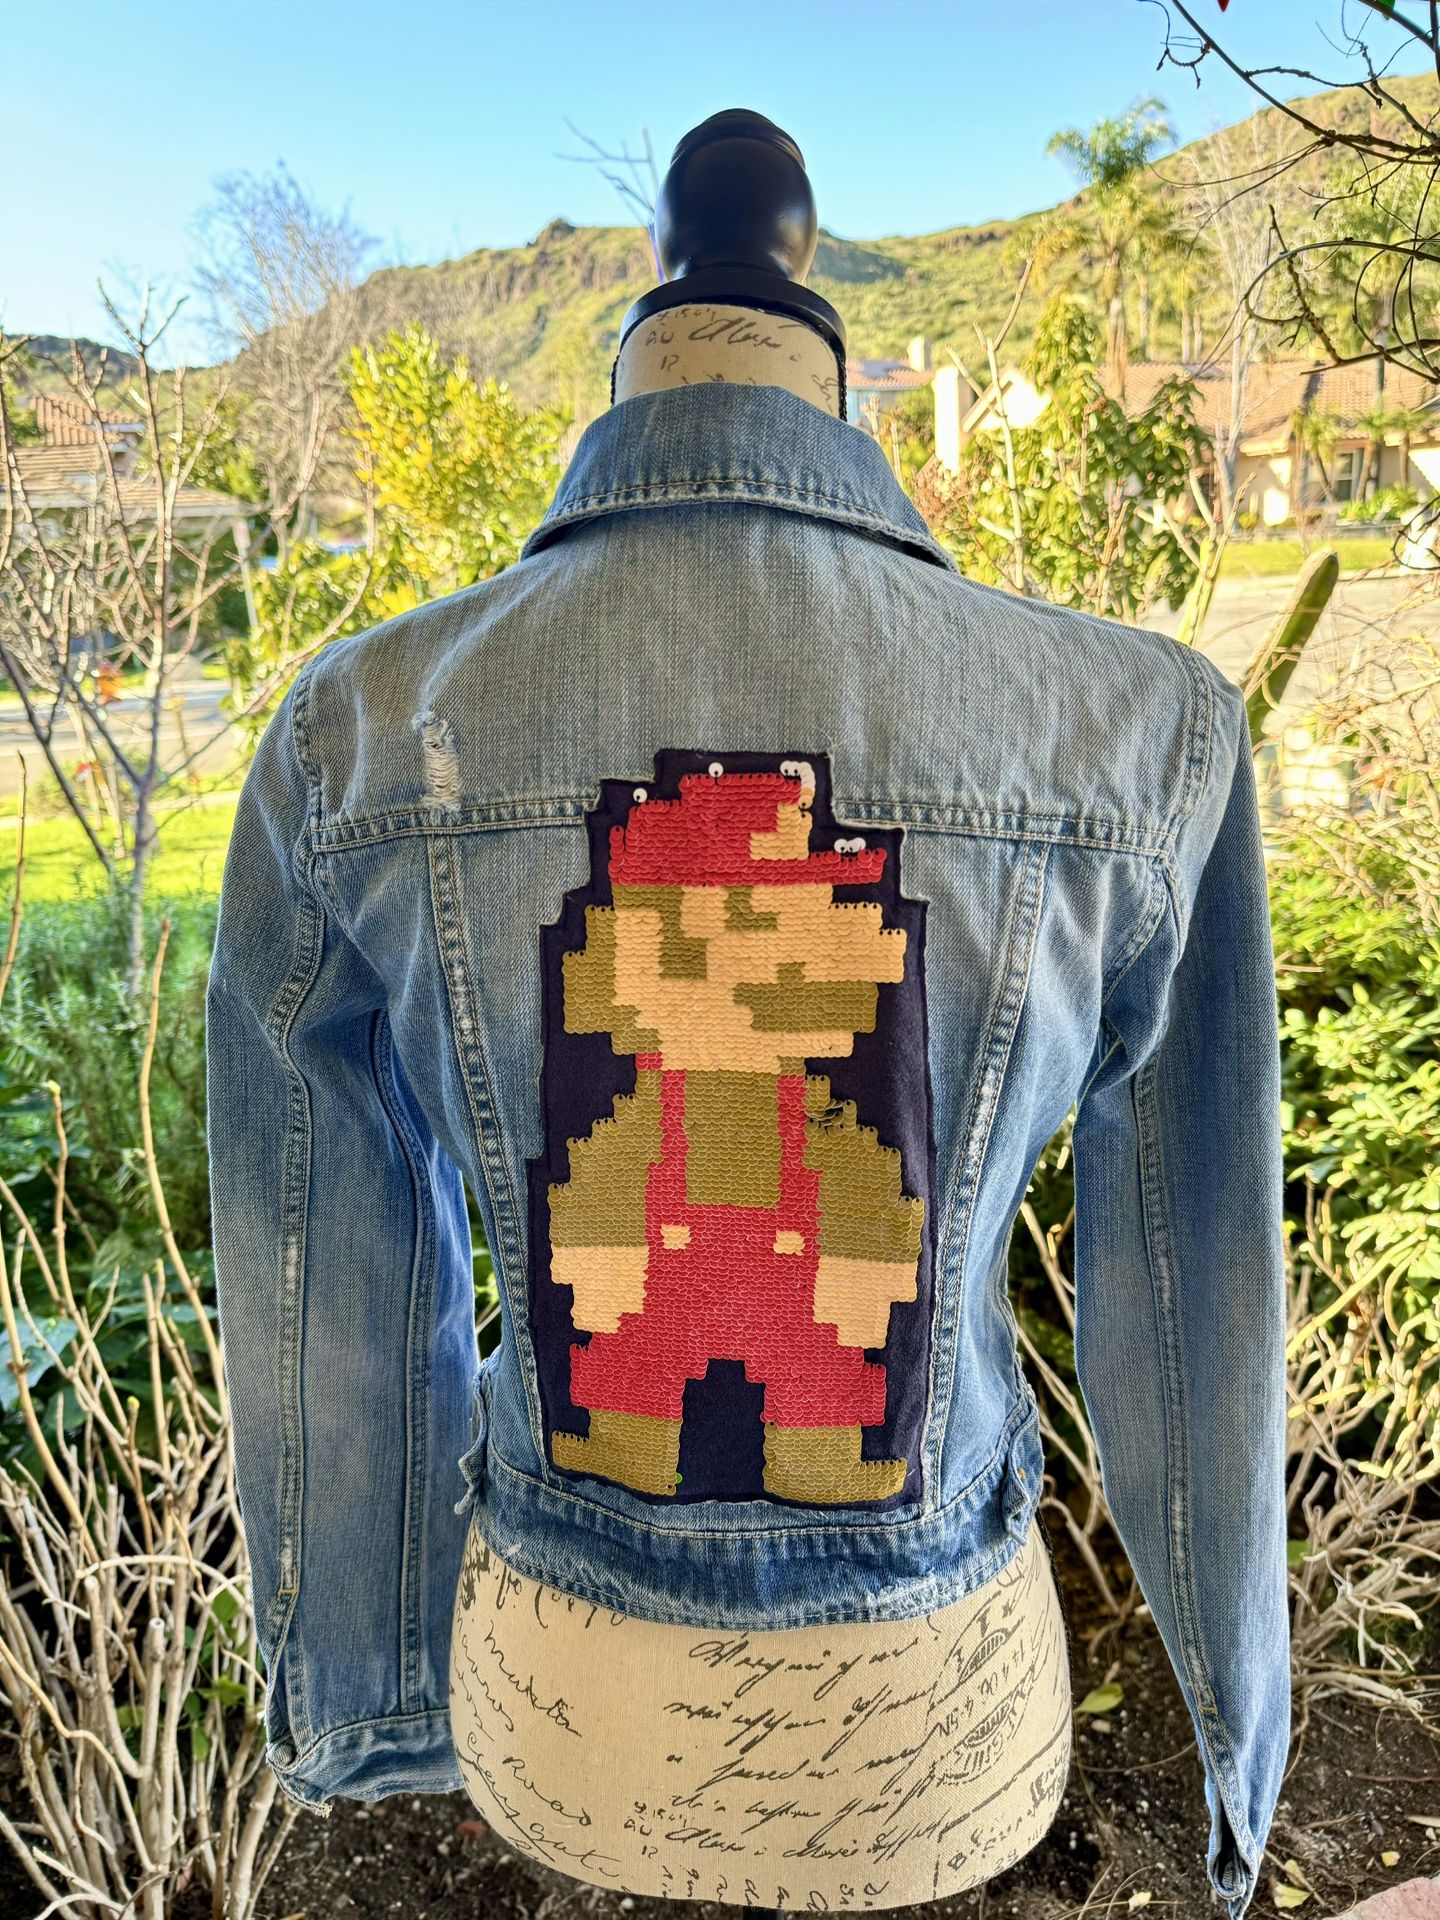 Mario/Nintendo Denim Jean Jacket With Reversible Sequins That Turns Into Another Character